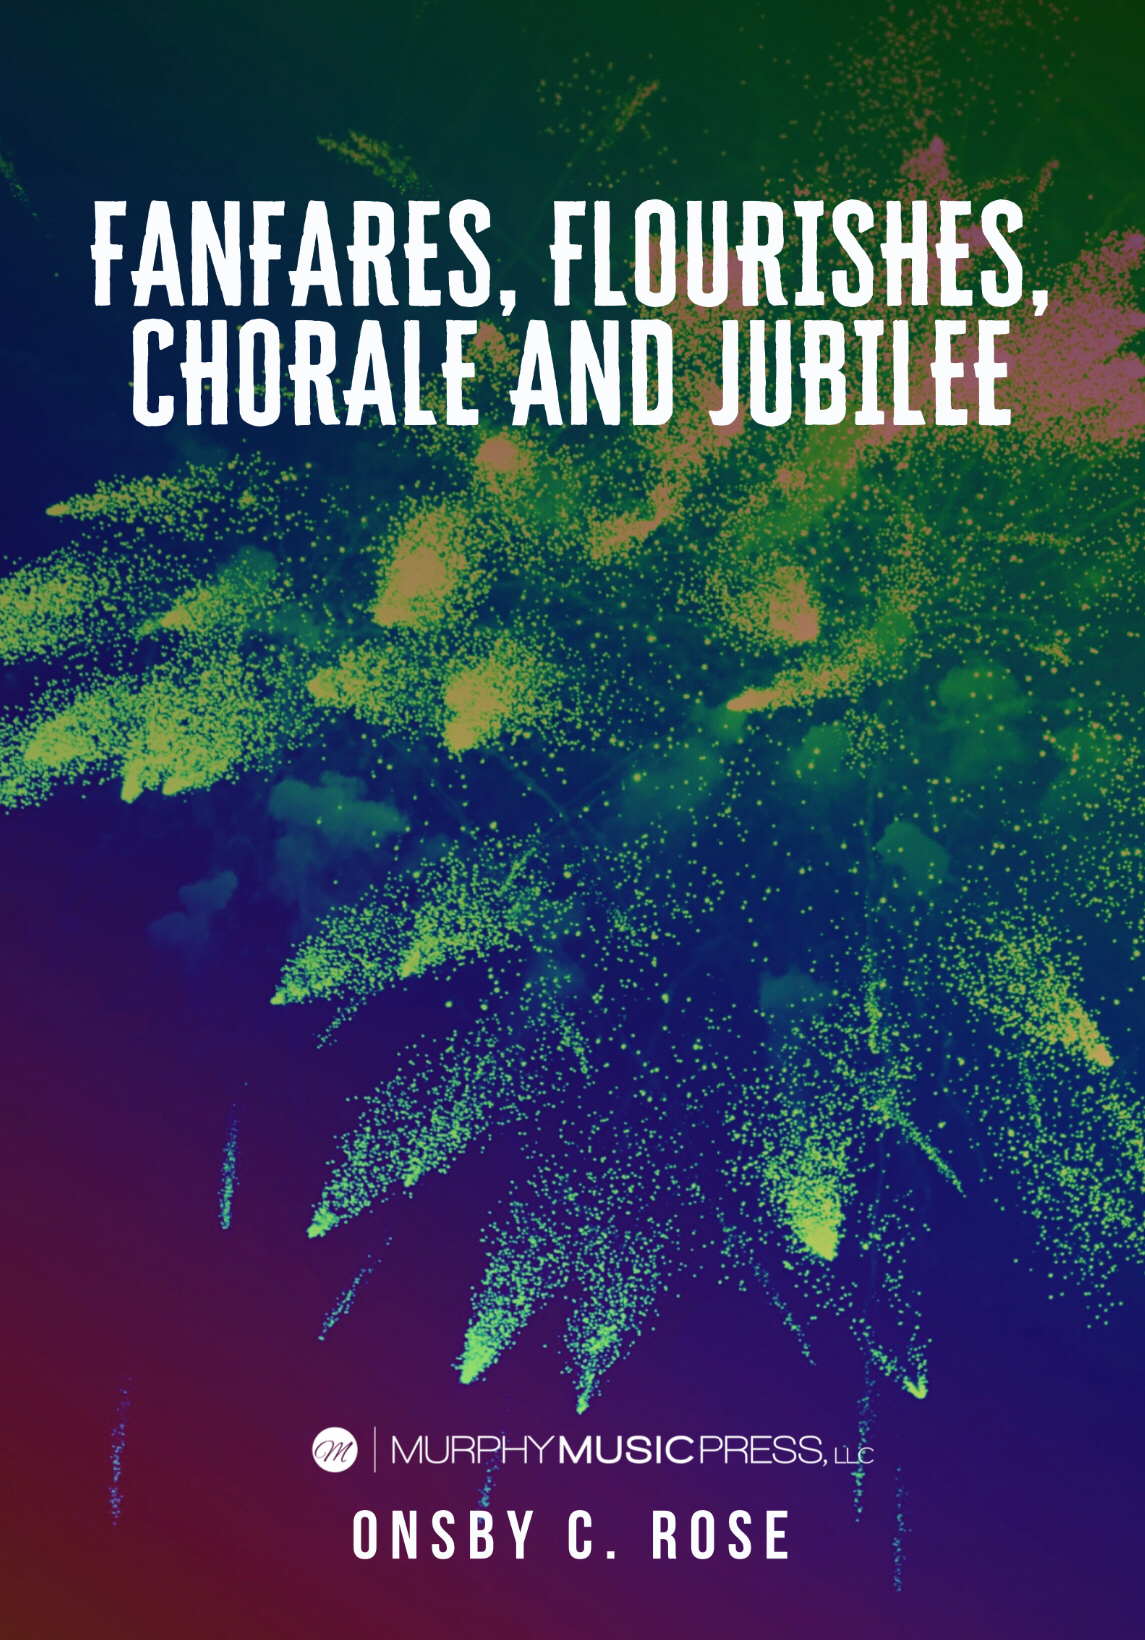 Fanfares, Flourishes, Chorale, And Jubilee by Onsby C. Rose